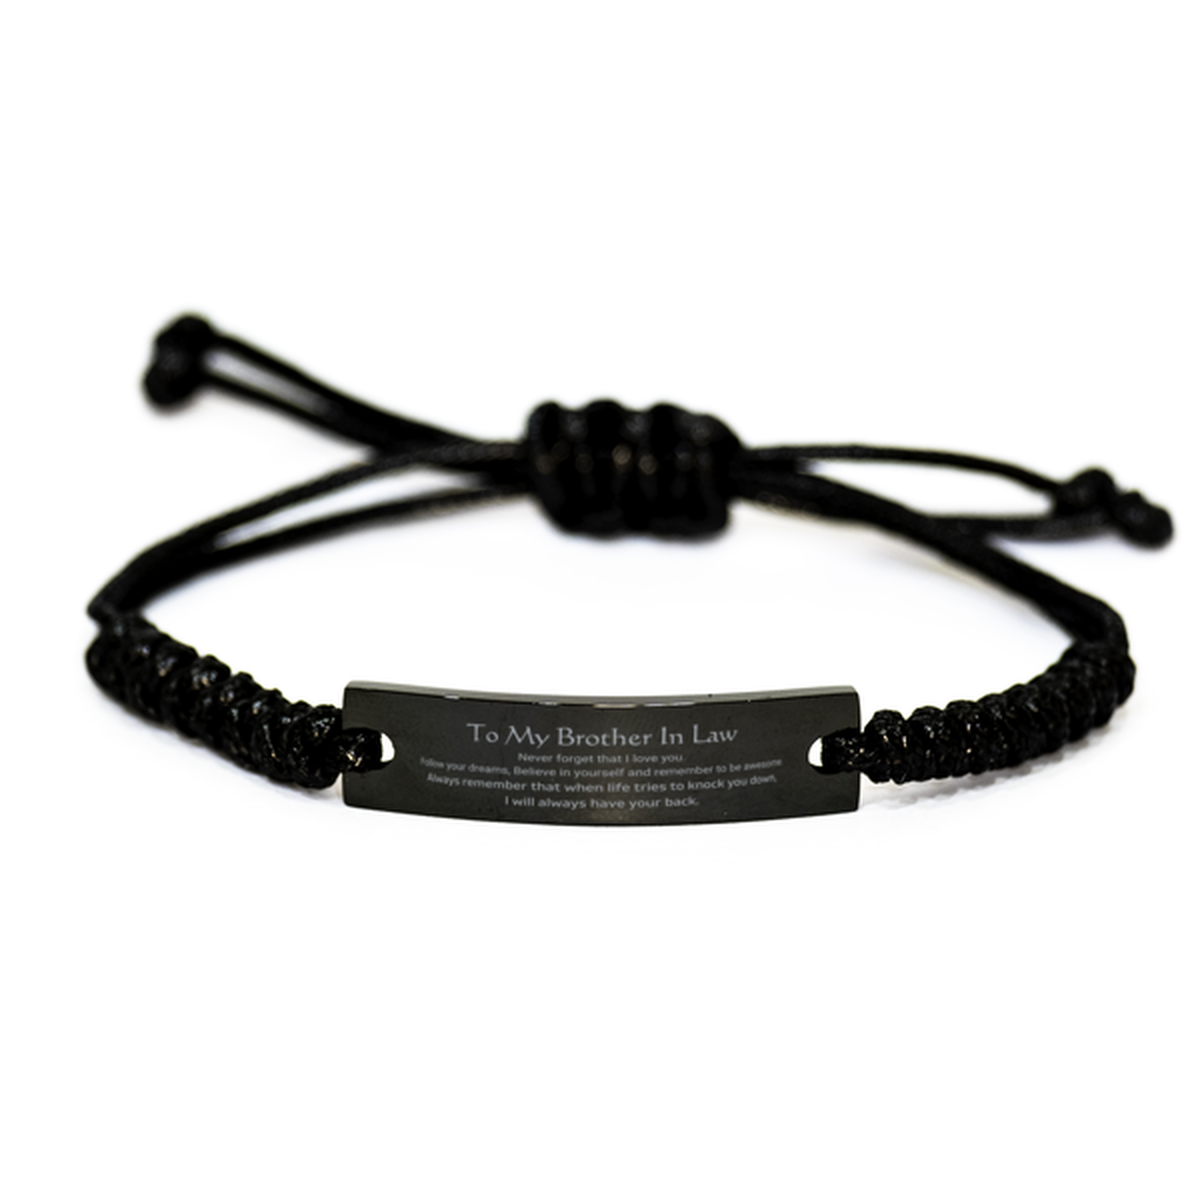 Inspirational Gifts for Brother In Law, Follow your dreams, Believe in yourself, Brother In Law Black Rope Bracelet, Birthday Christmas Unique Gifts For Brother In Law